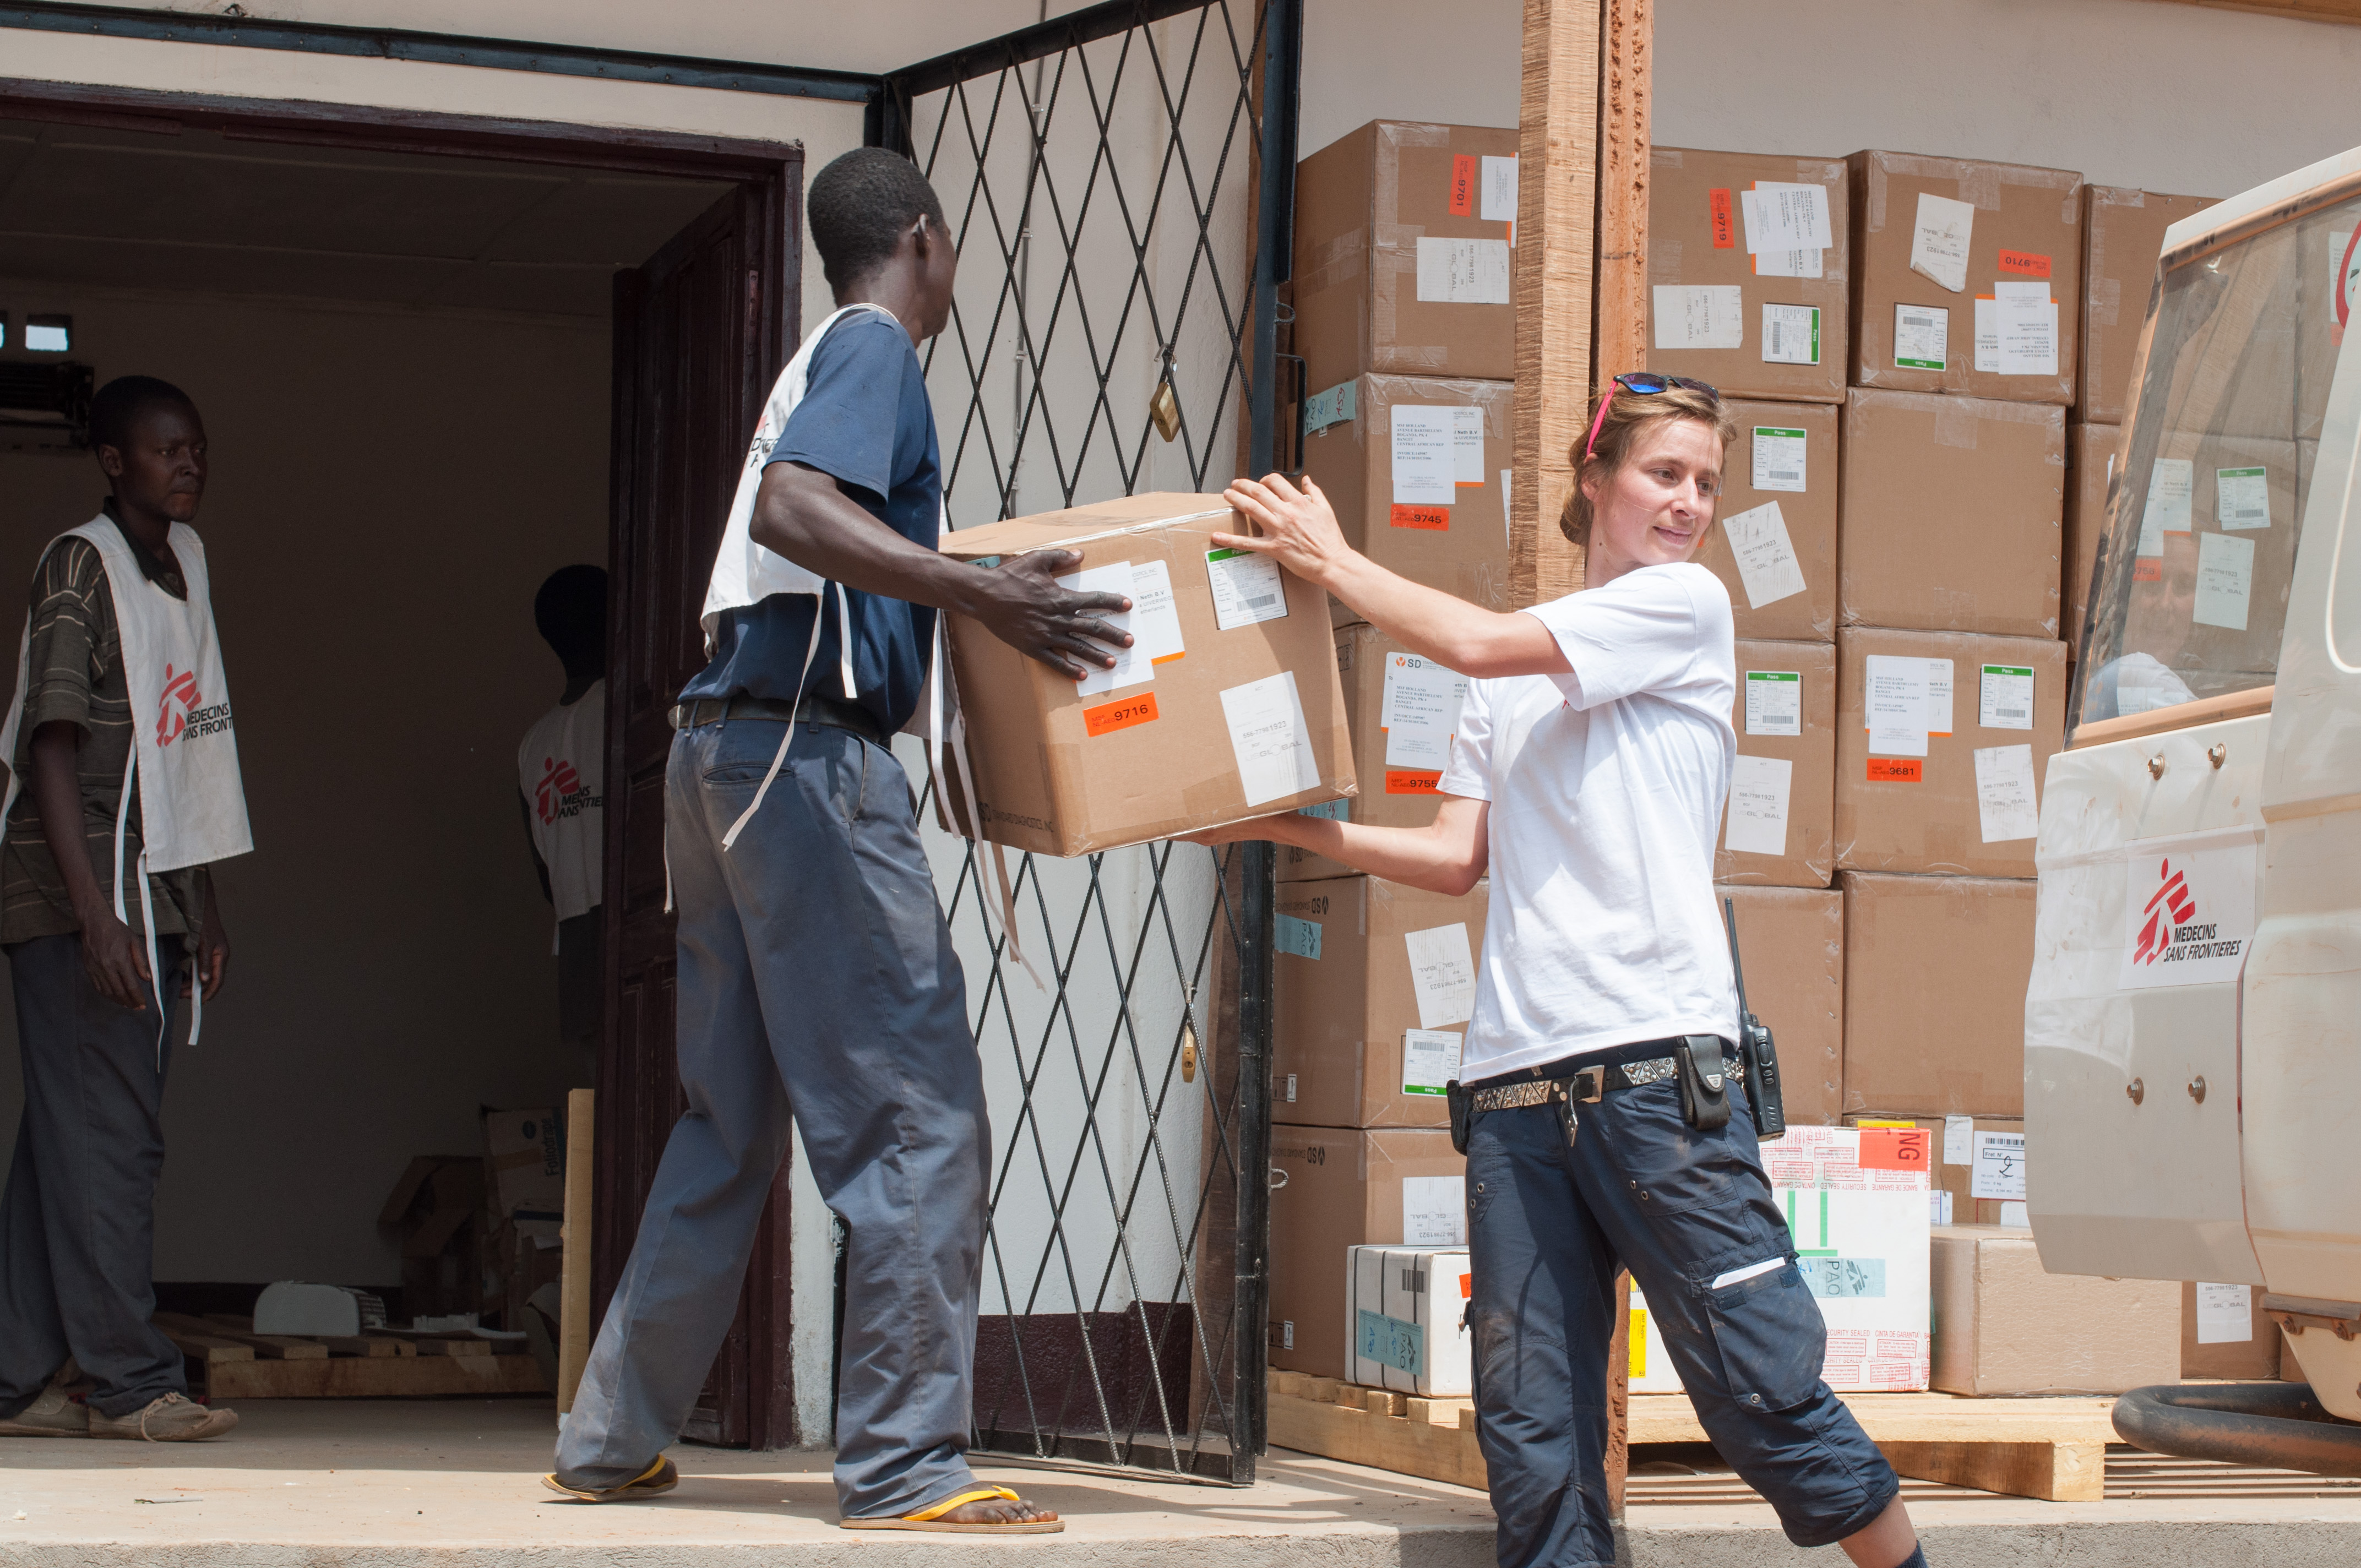 © Giorgio Contessi/MSF - MSF logistician Jennifer Bock and her colleagues store 58 boxes containing one ton of medical supplies, mainly malaria testing kits, destined for the MSF-supported health centre in Boguila, Central African Republic. 